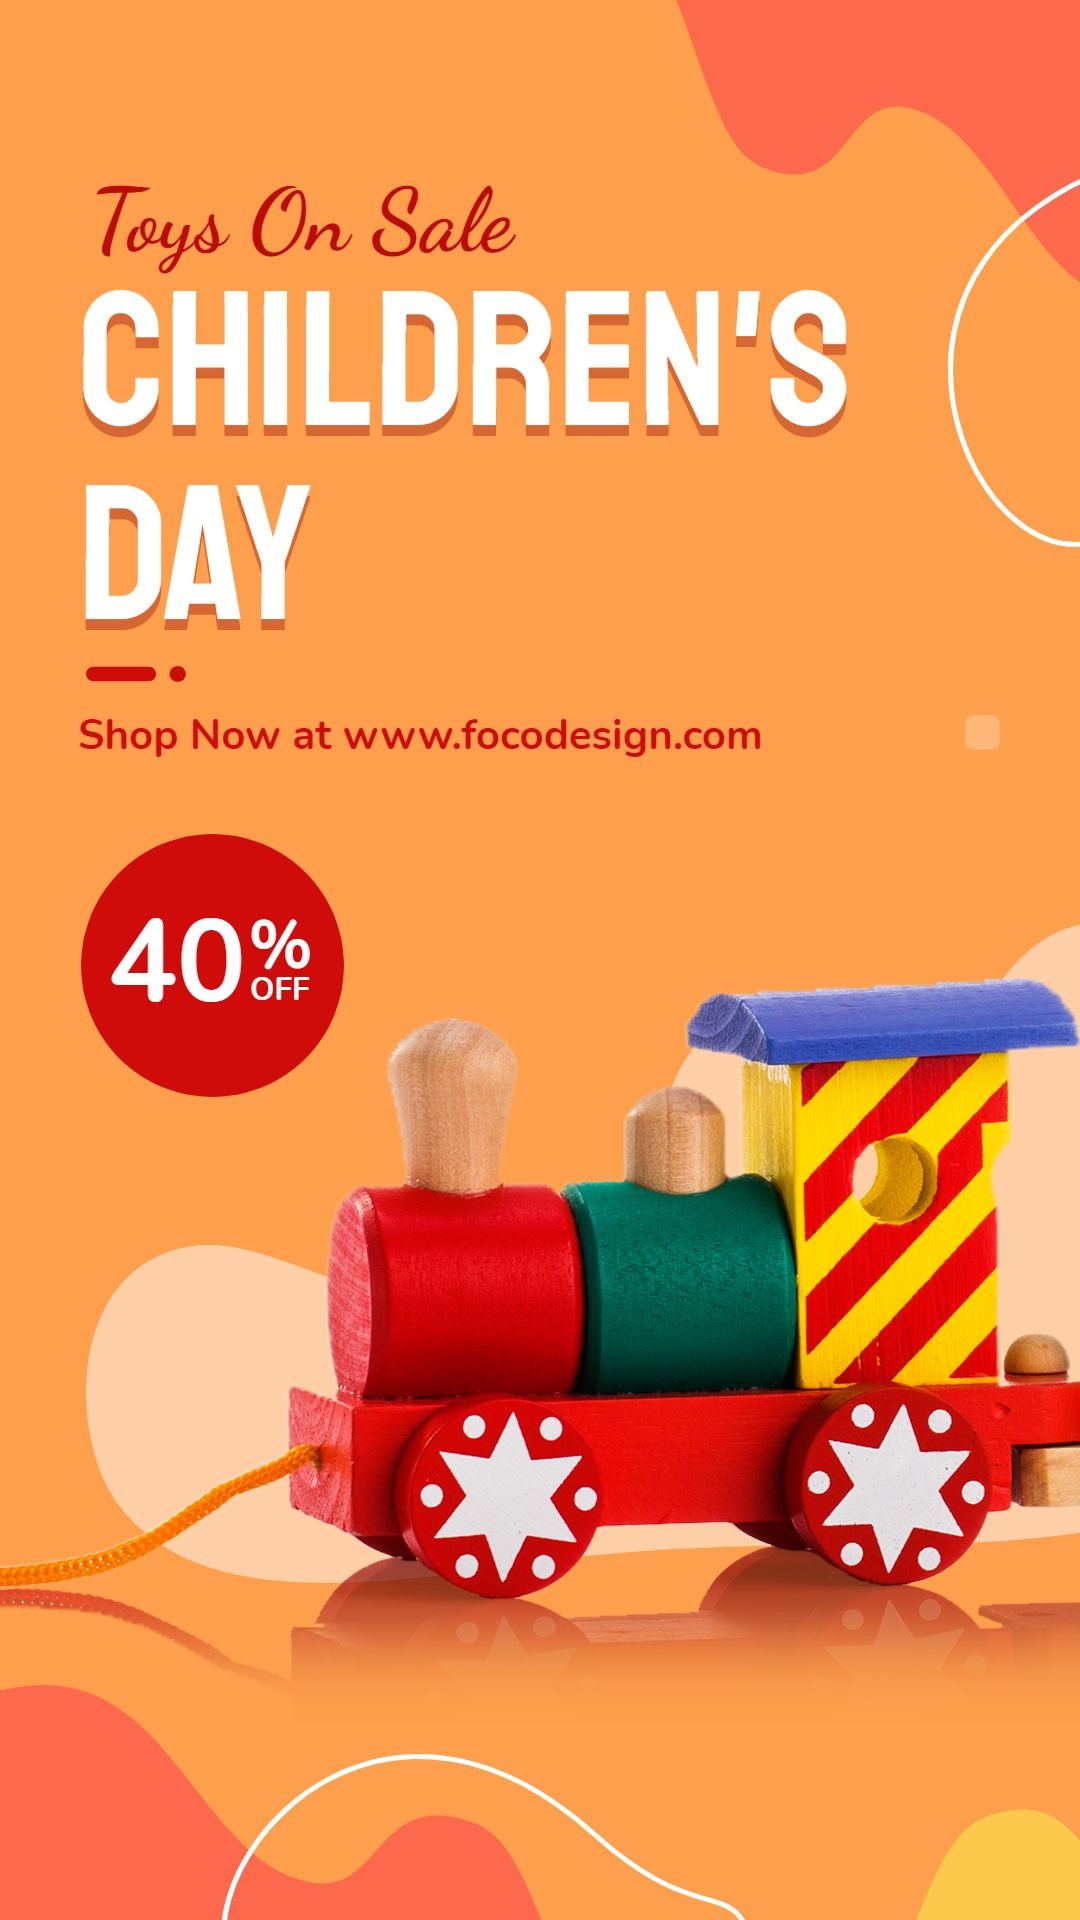 Toy Train Children's Day Toy Hobby Handcraft Discount Sale Promo Ecommerce Story预览效果